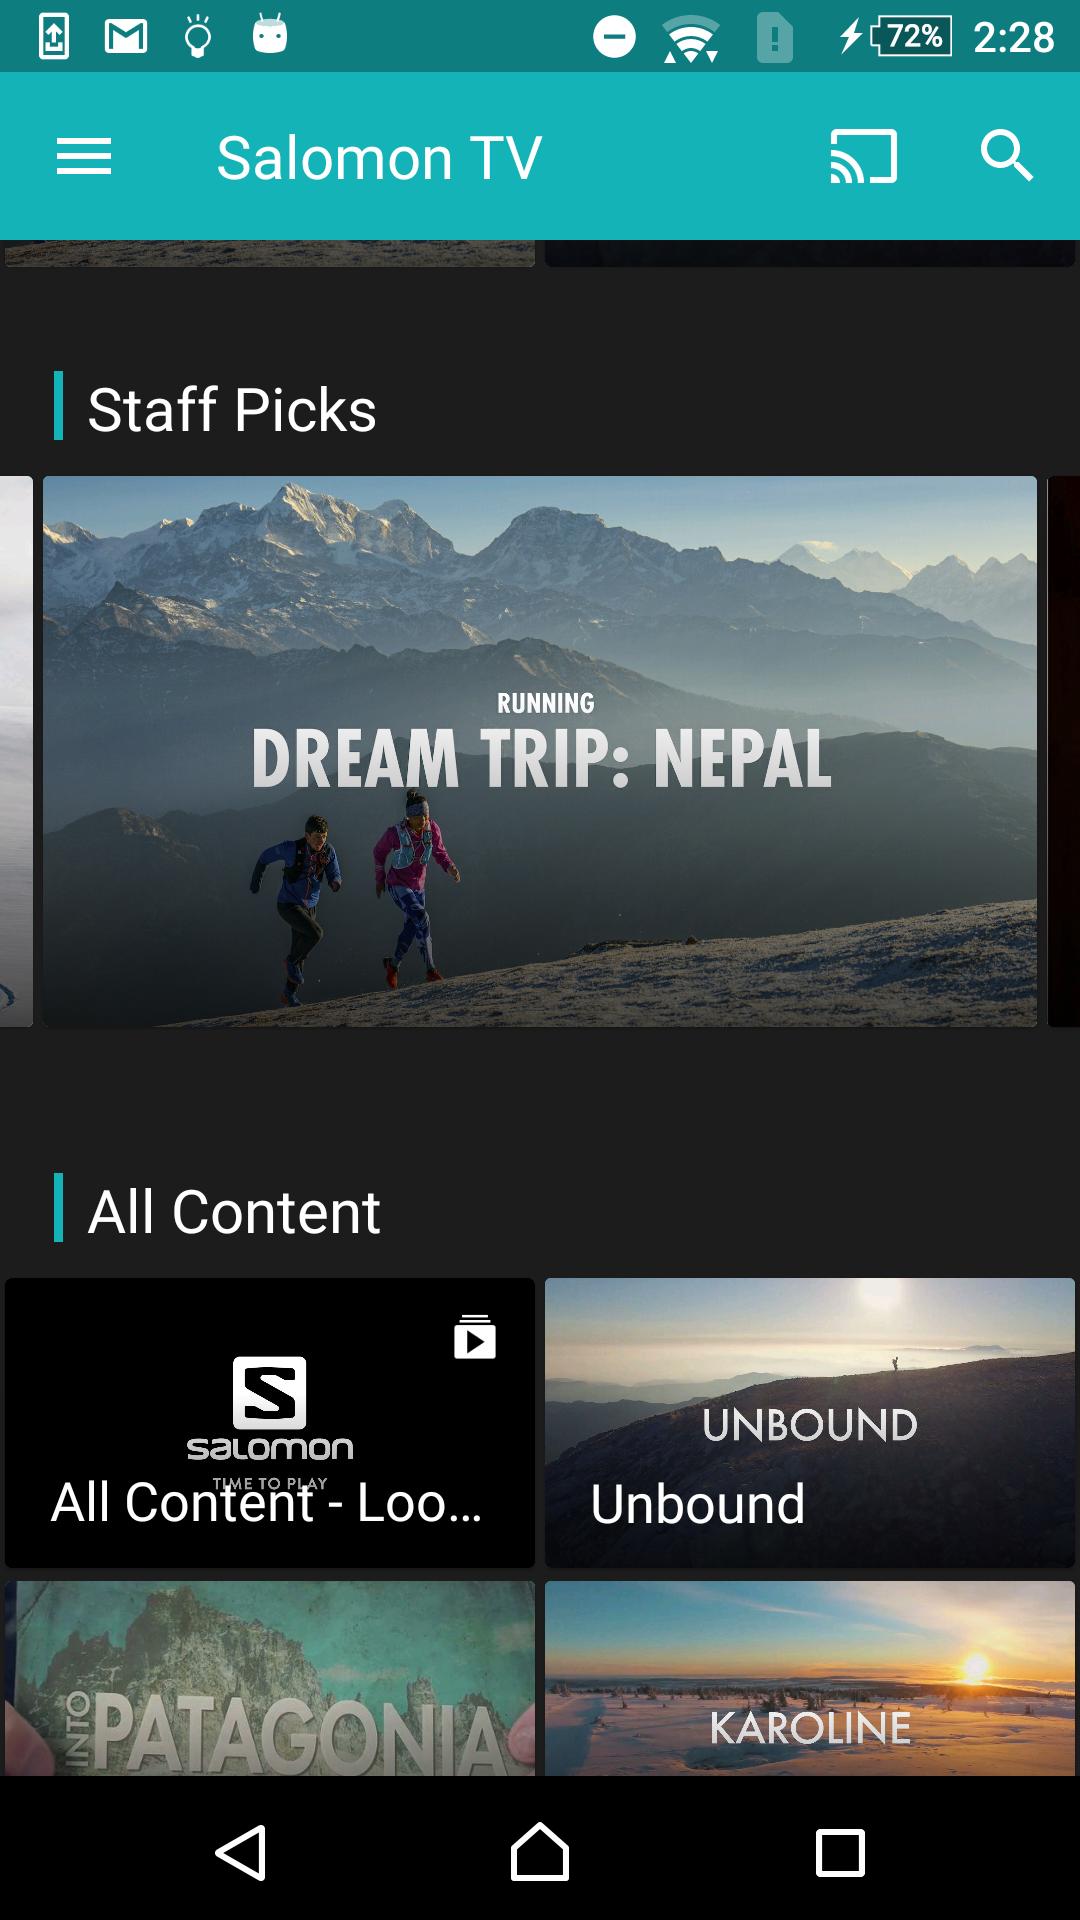 Salomon TV for Android - APK Download